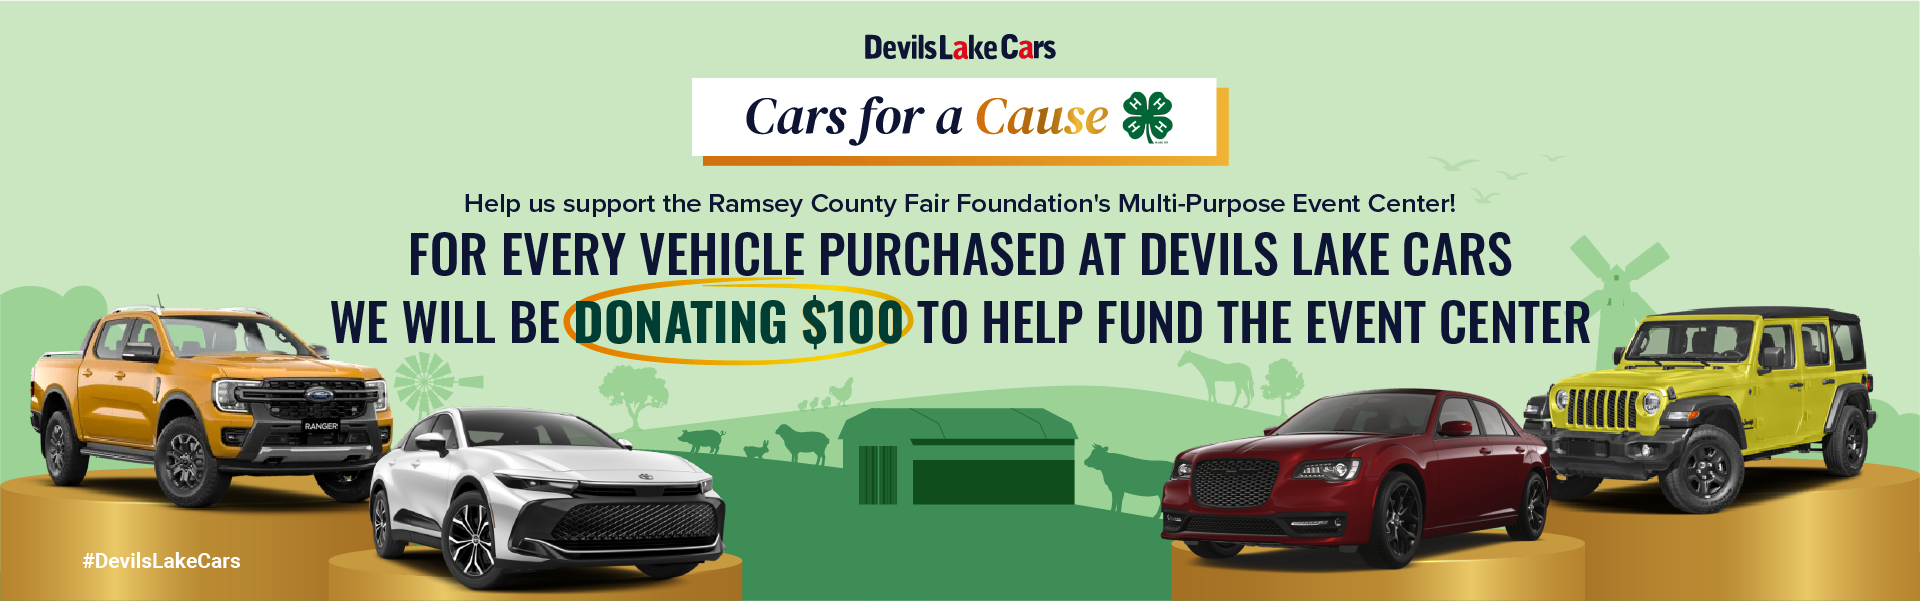 Cars For a Cause